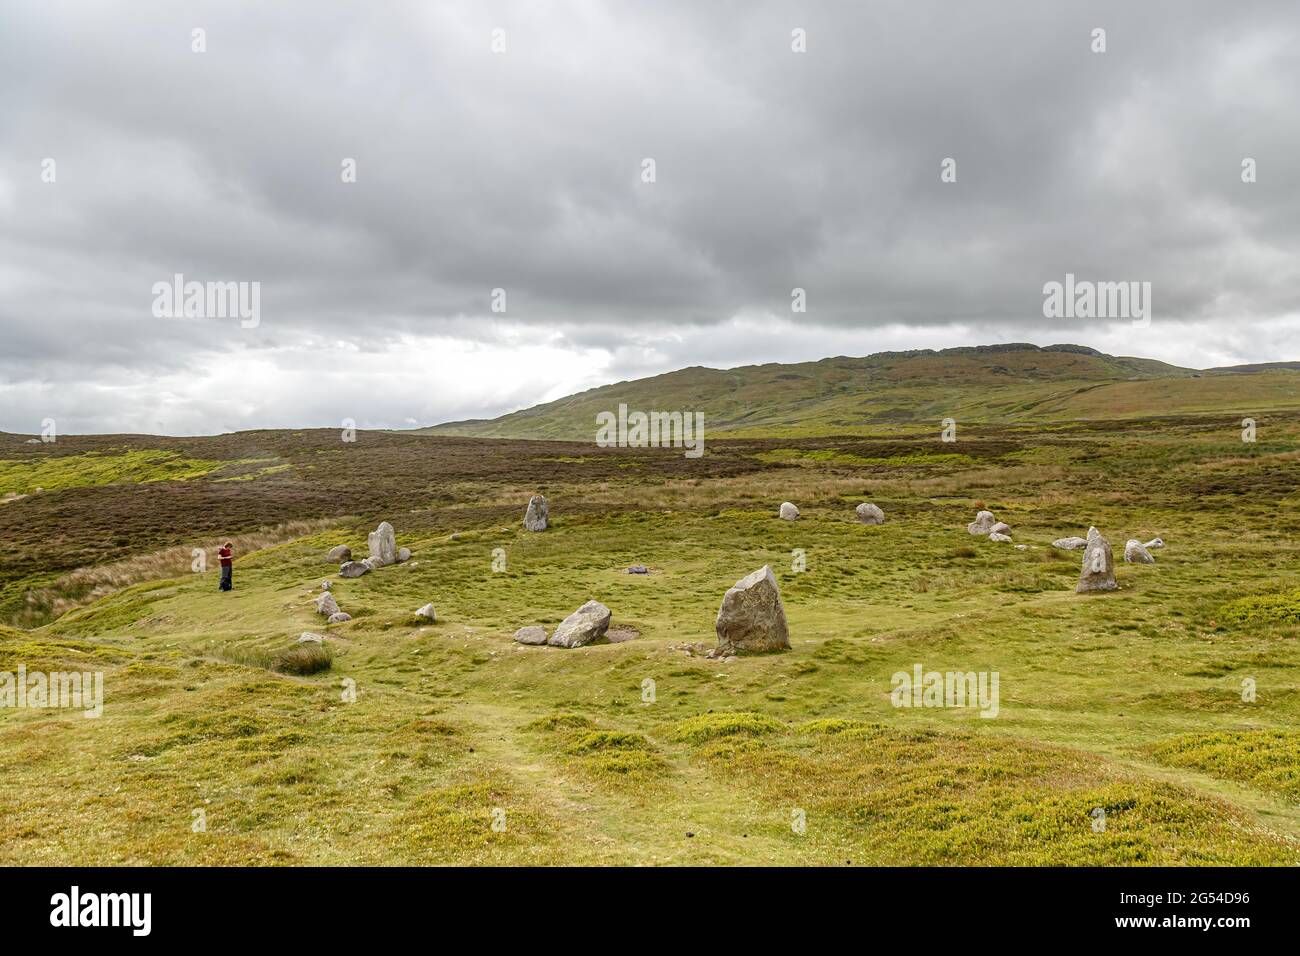 A single female using her phone at the Neolithic Site commonly referred to a Druid Circle near Penmaenmawr, Gwynedd, Wales Stock Photo